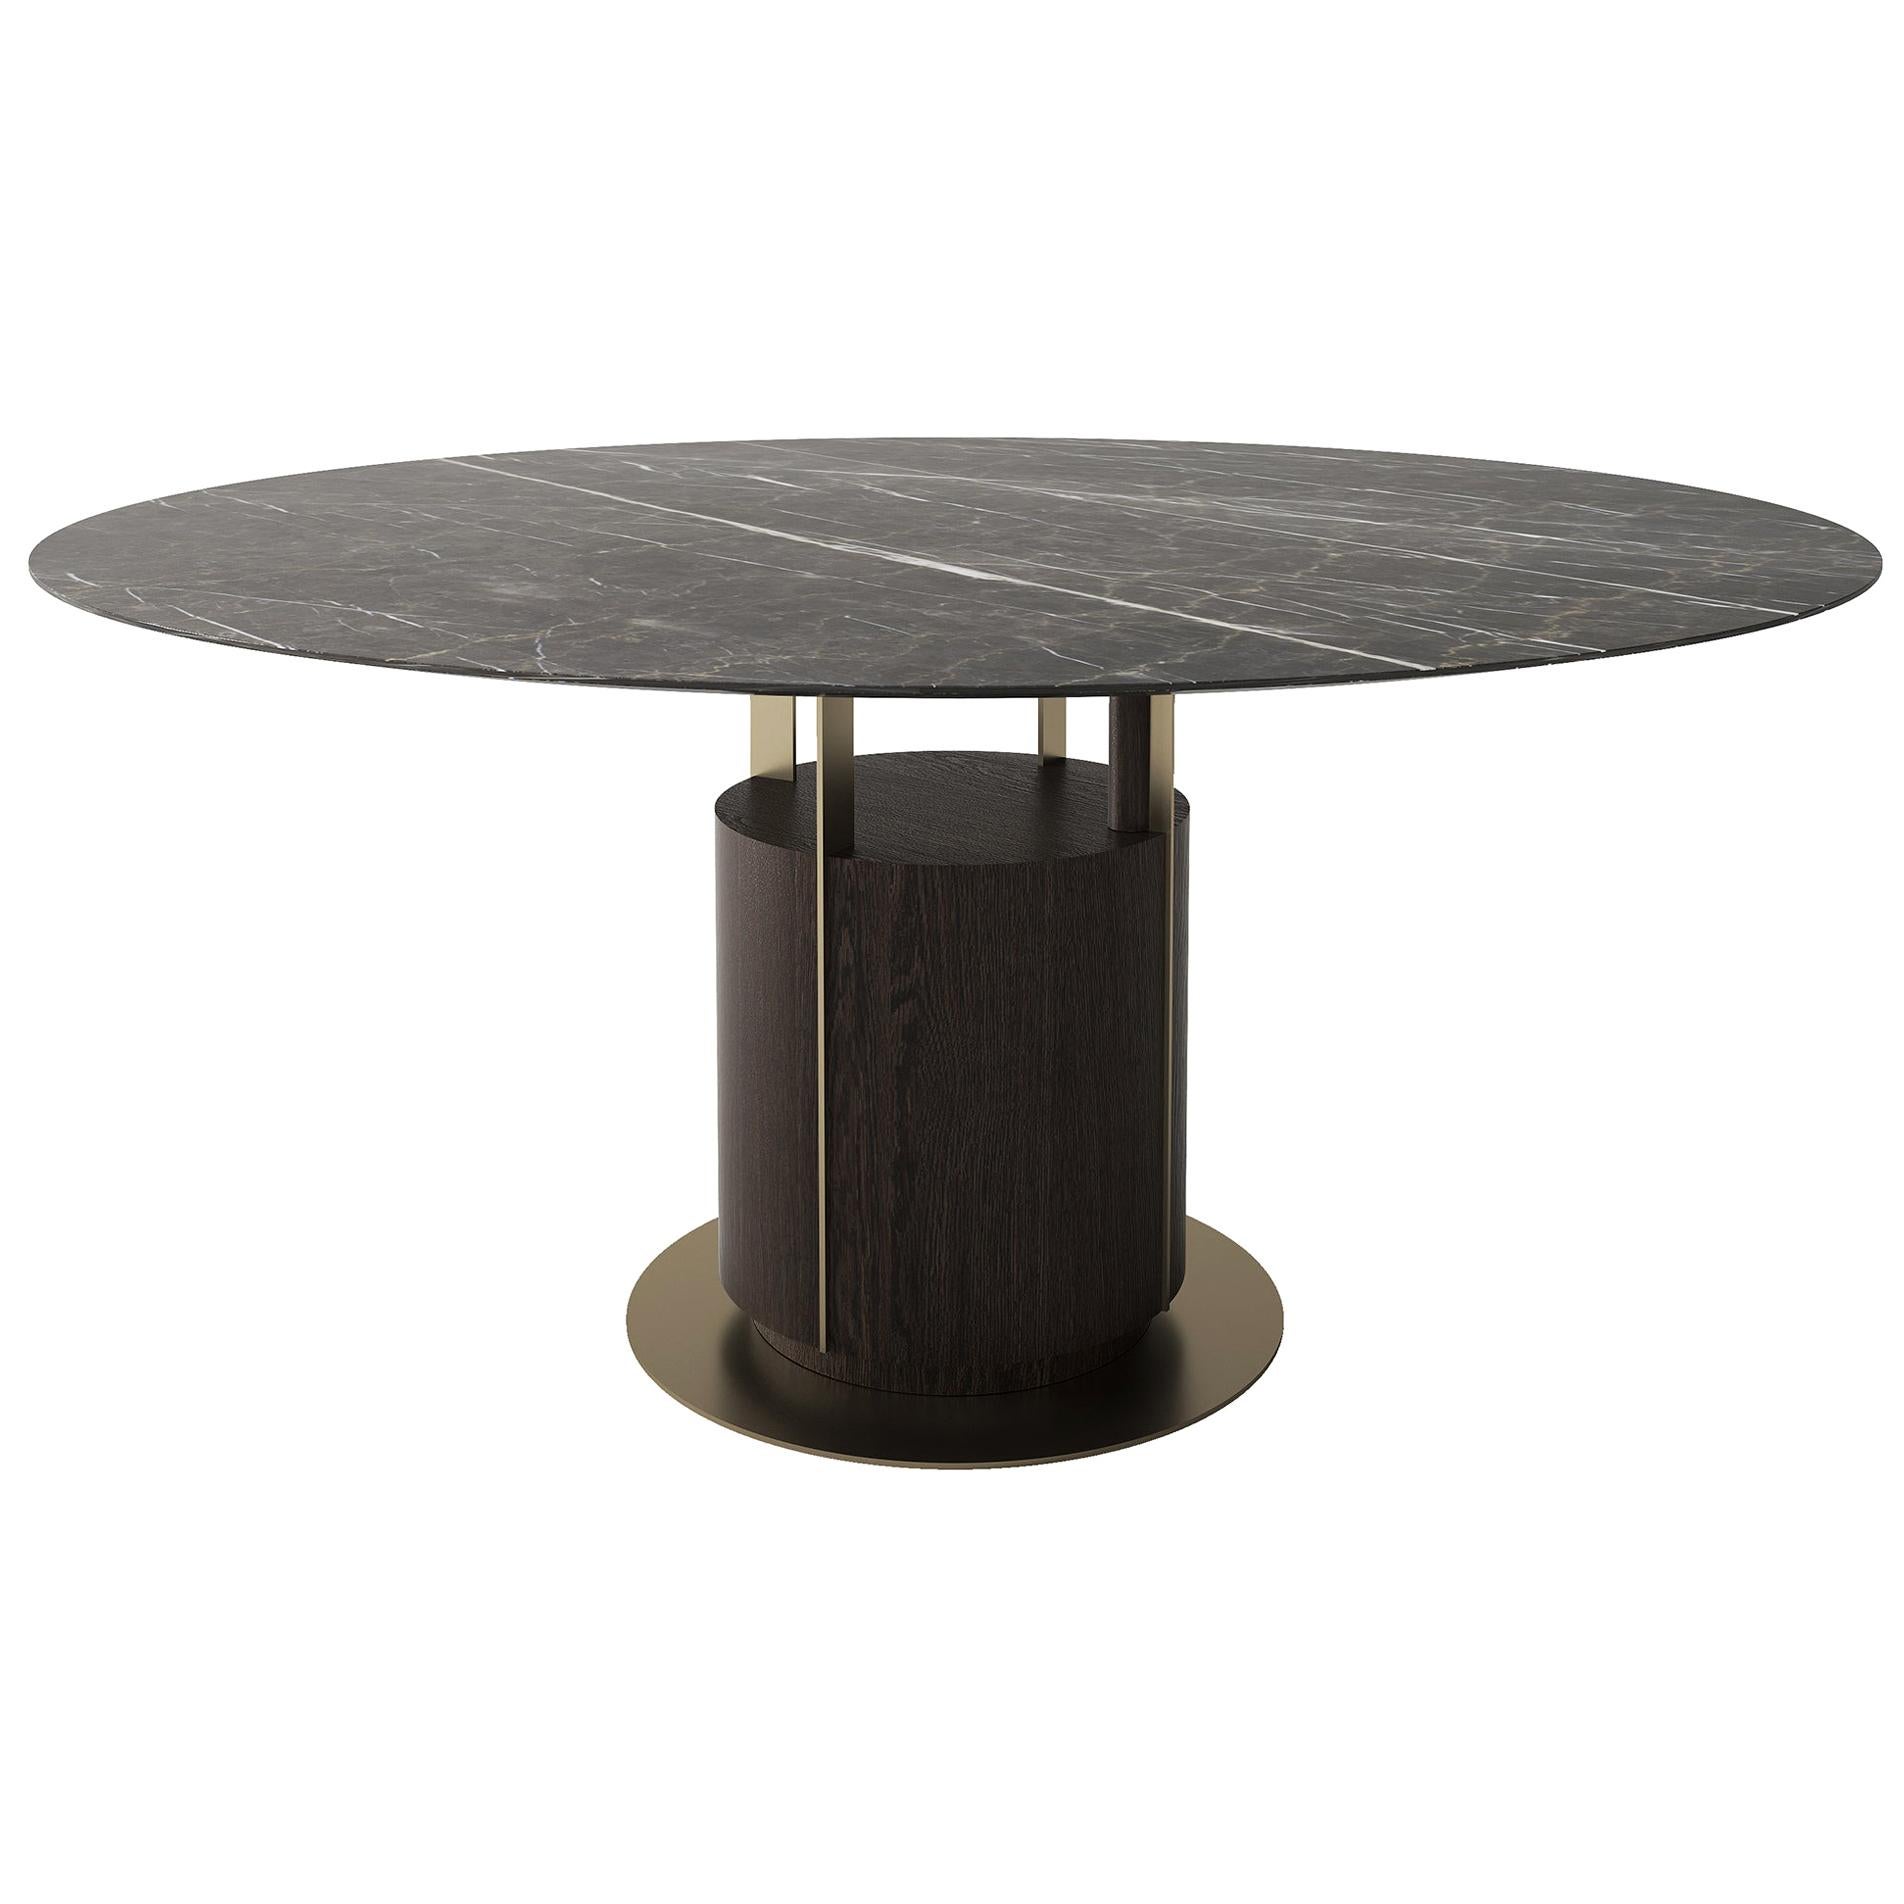 Modernity, 21st Century, Brass, Marble, Oak, Gio Round Dining Table